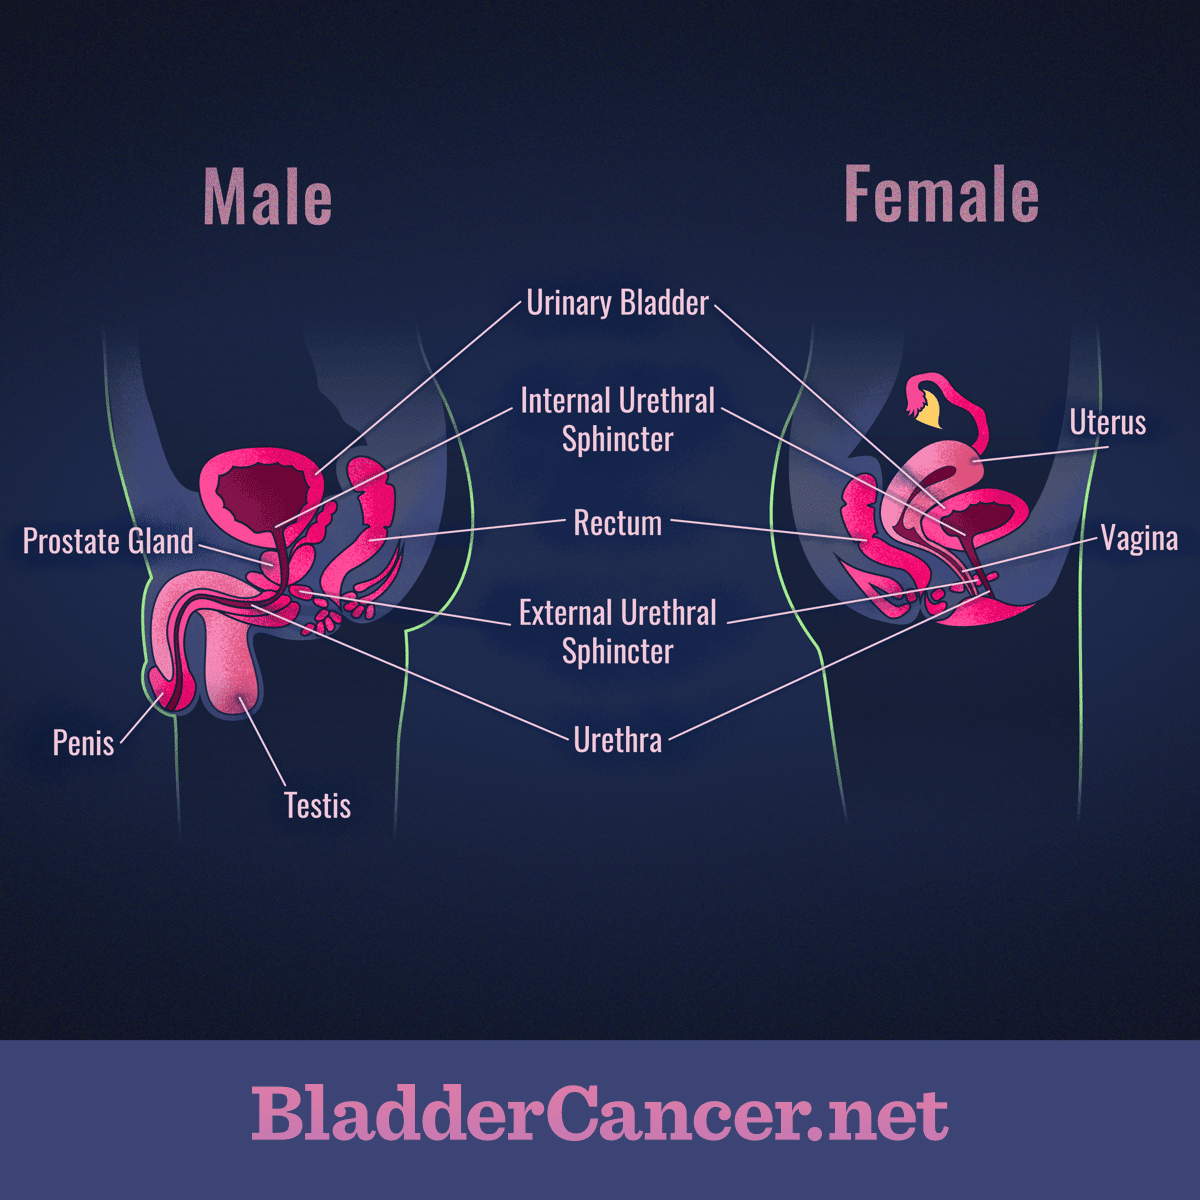 Anatomy of the Bladder and Urinary Tract in Men and Women